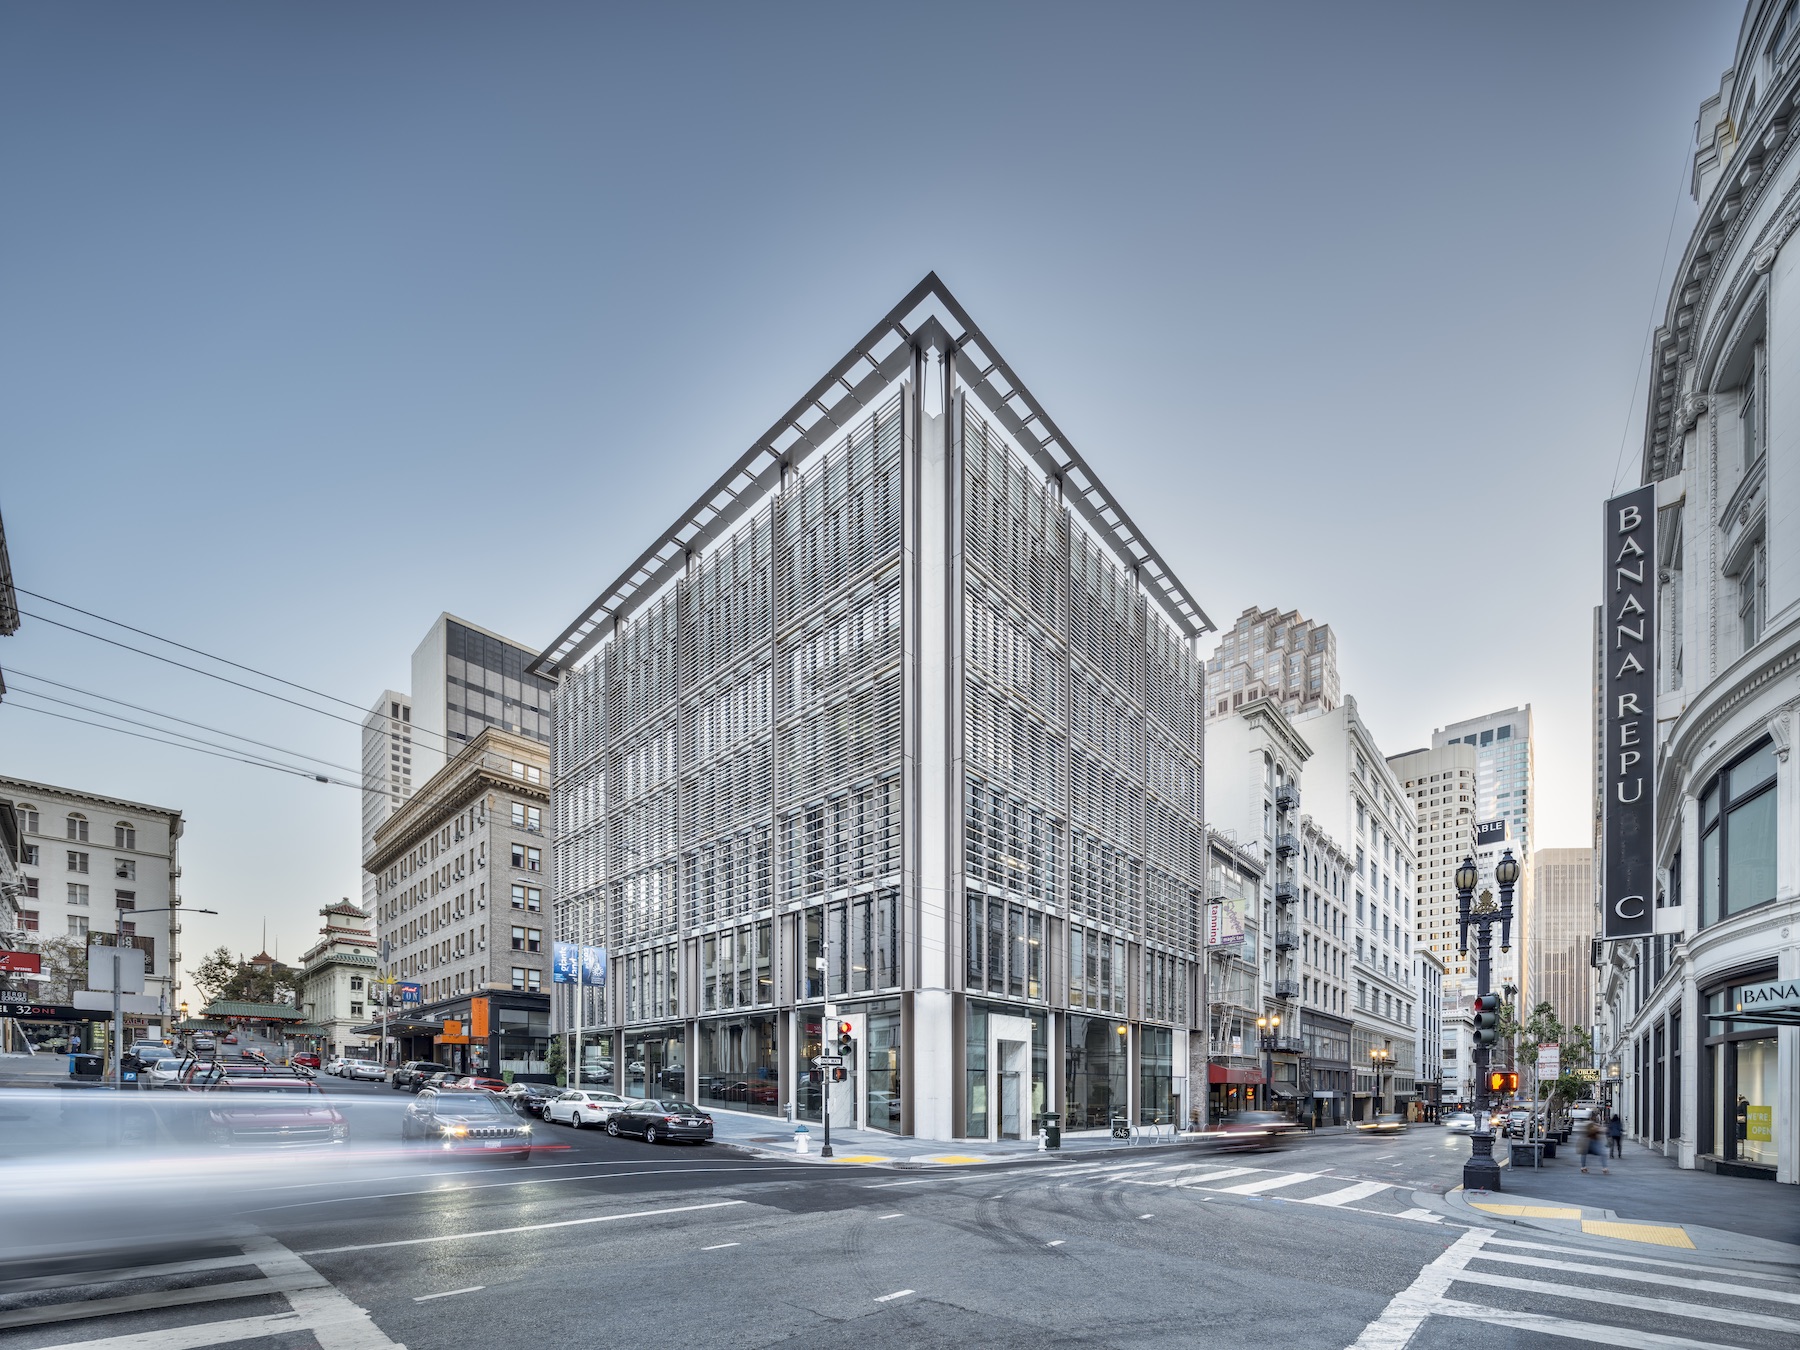 300 Grant Ave development, San Francisco Union Square, by Lincoln Property Company and MBH Architects, photo by Matthew Anderson, Top 95 Architecture:Engineering Firms for 2021